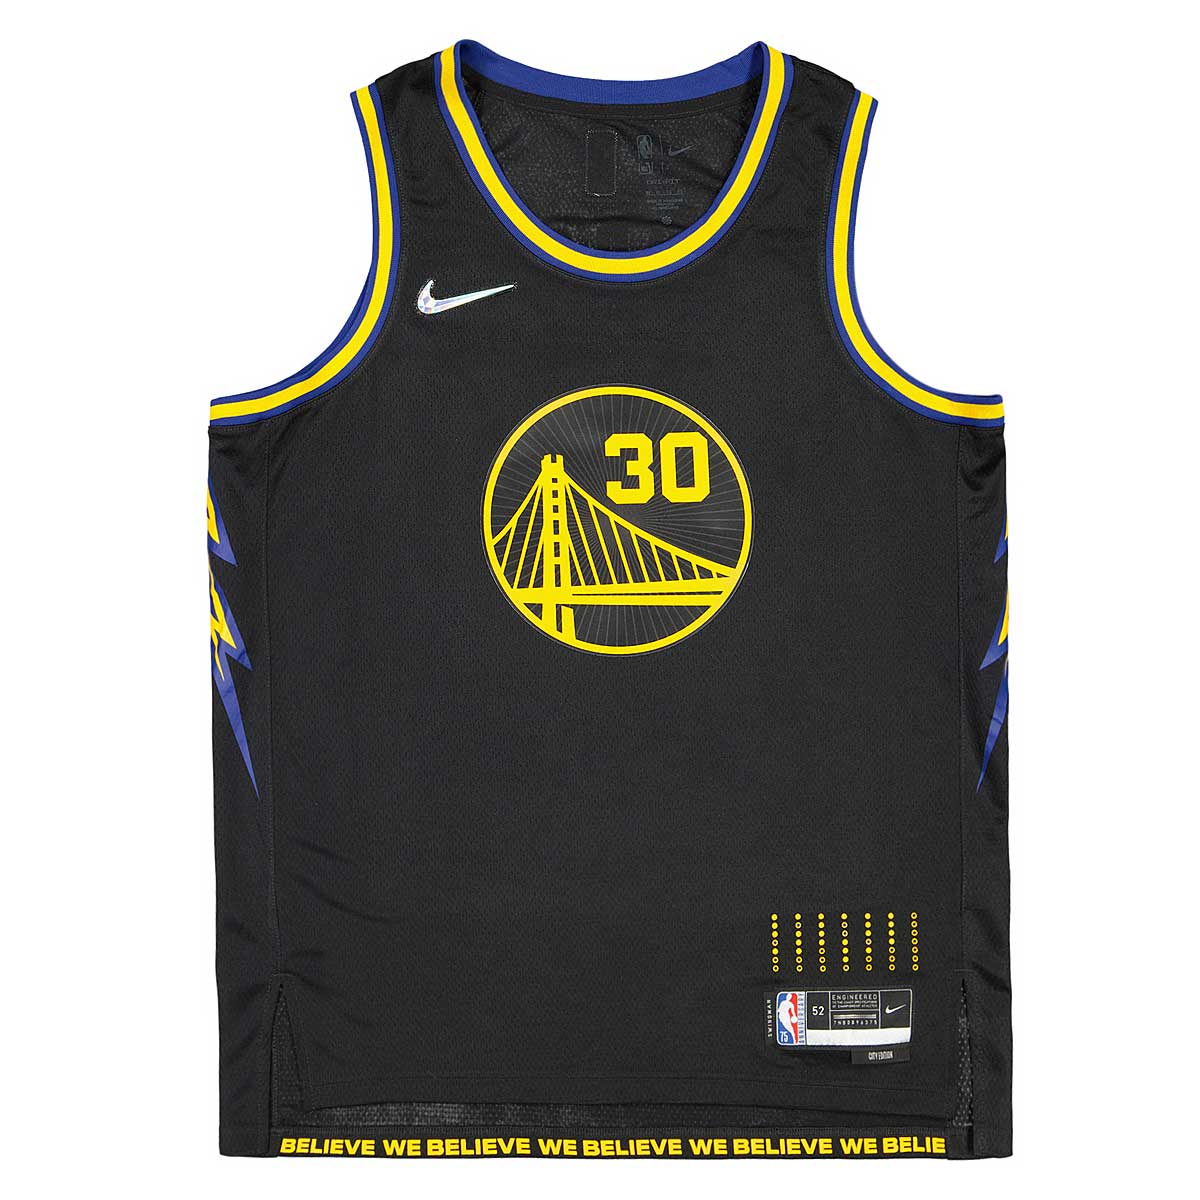  Basketball Shirt Black Gold Jersey, NBA Golden State Warriors Stephen  Curry #30, Embroidered Vest Basketball Clothing (Size : M) : Clothing,  Shoes & Jewelry